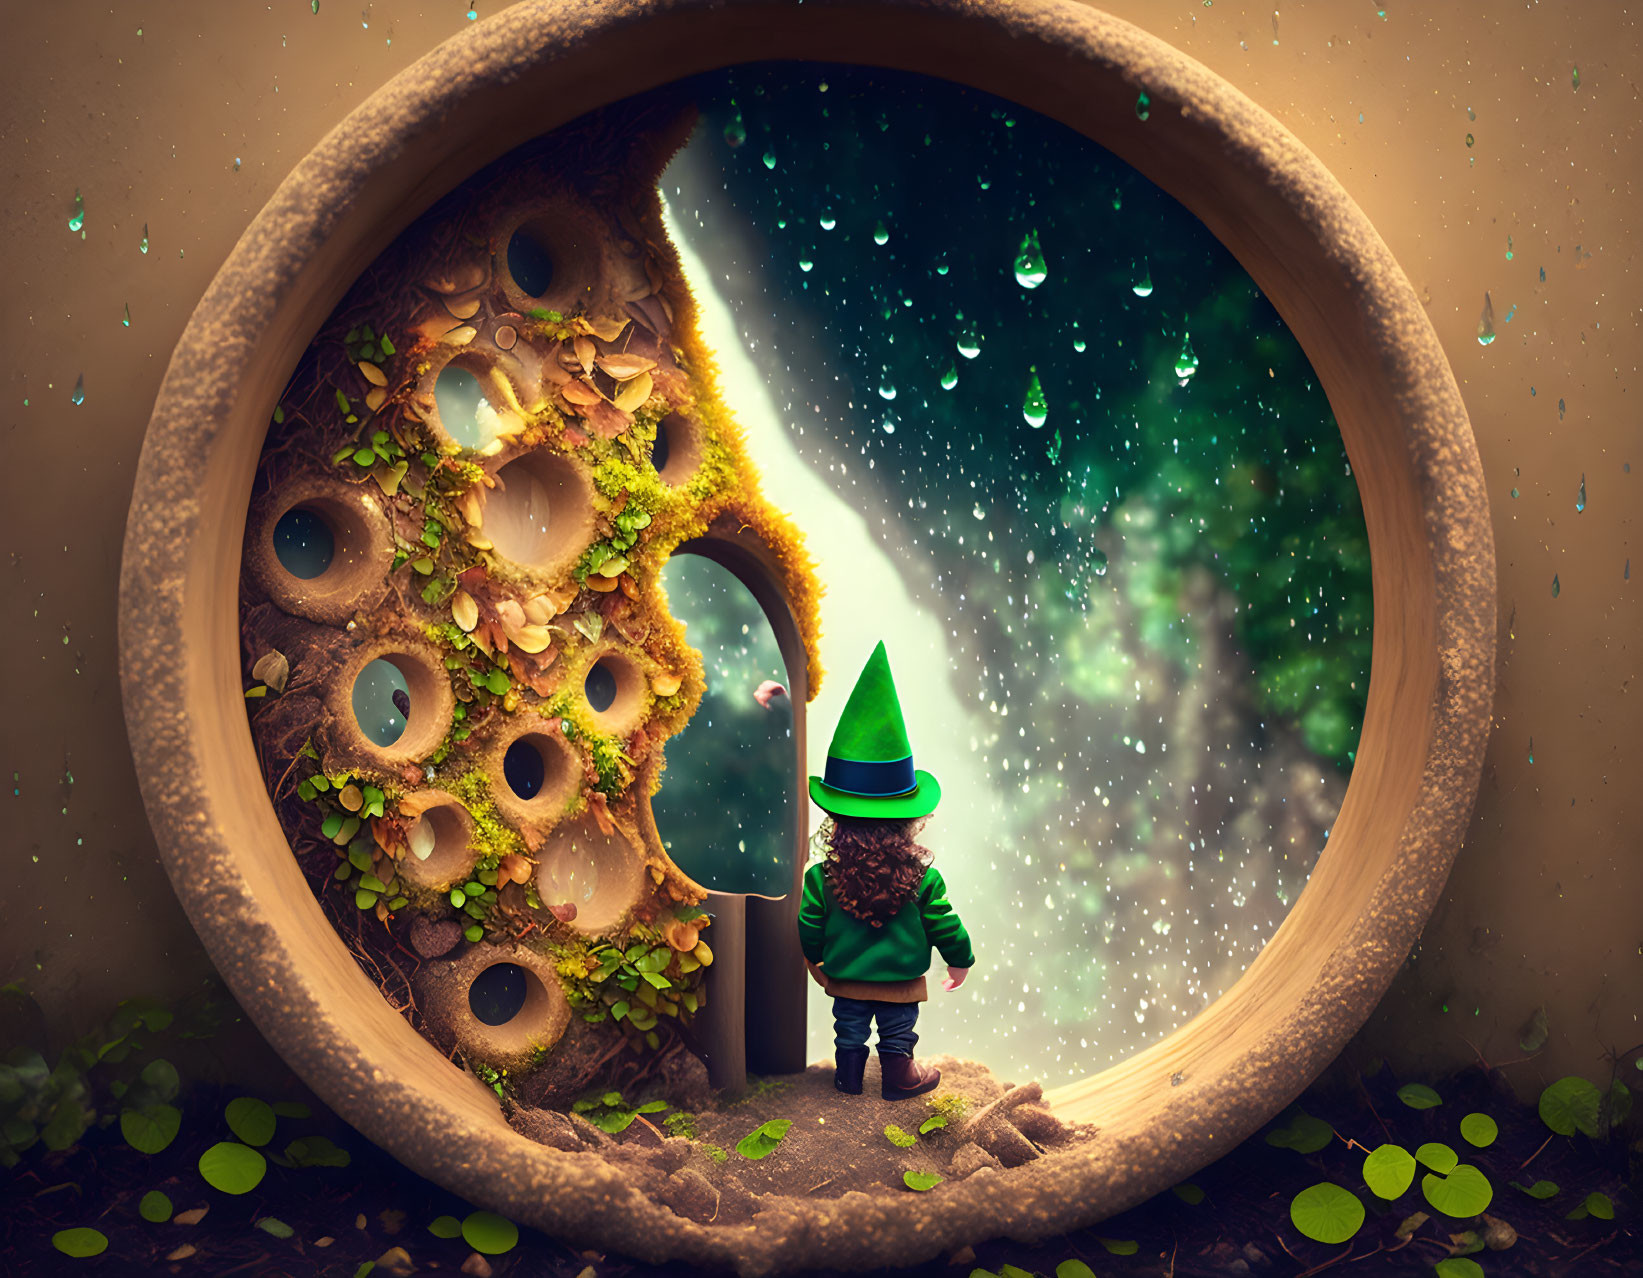 Gnome in circular doorway under starry sky and enchanted tree